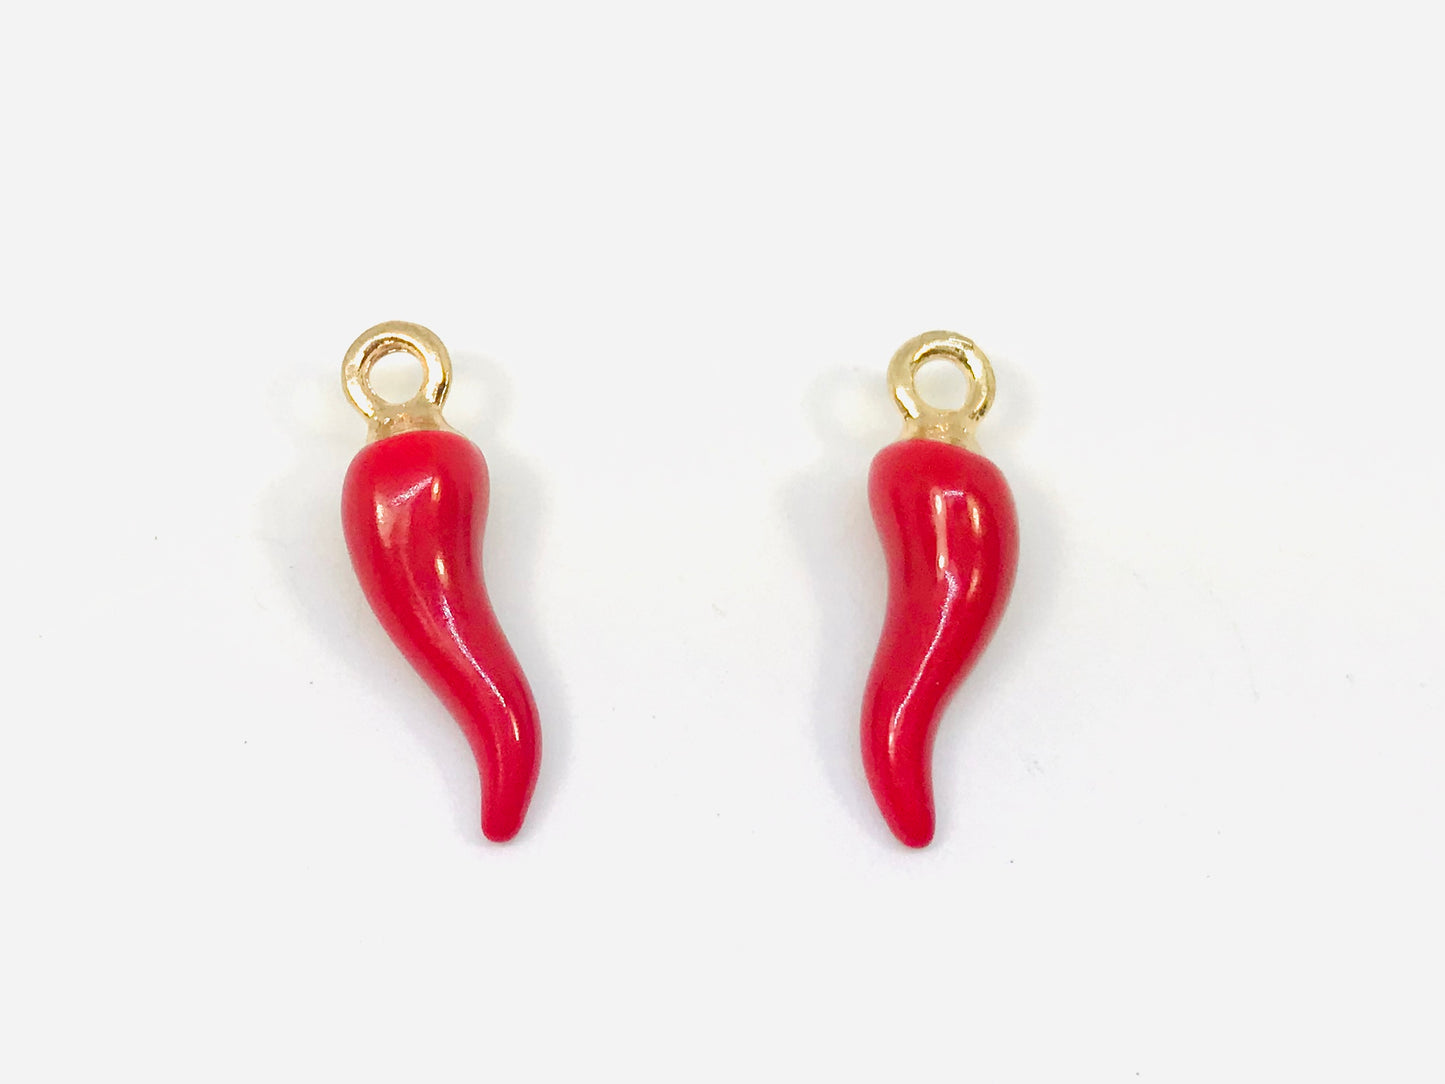 3 Red Chili Pepper Novelty Charms